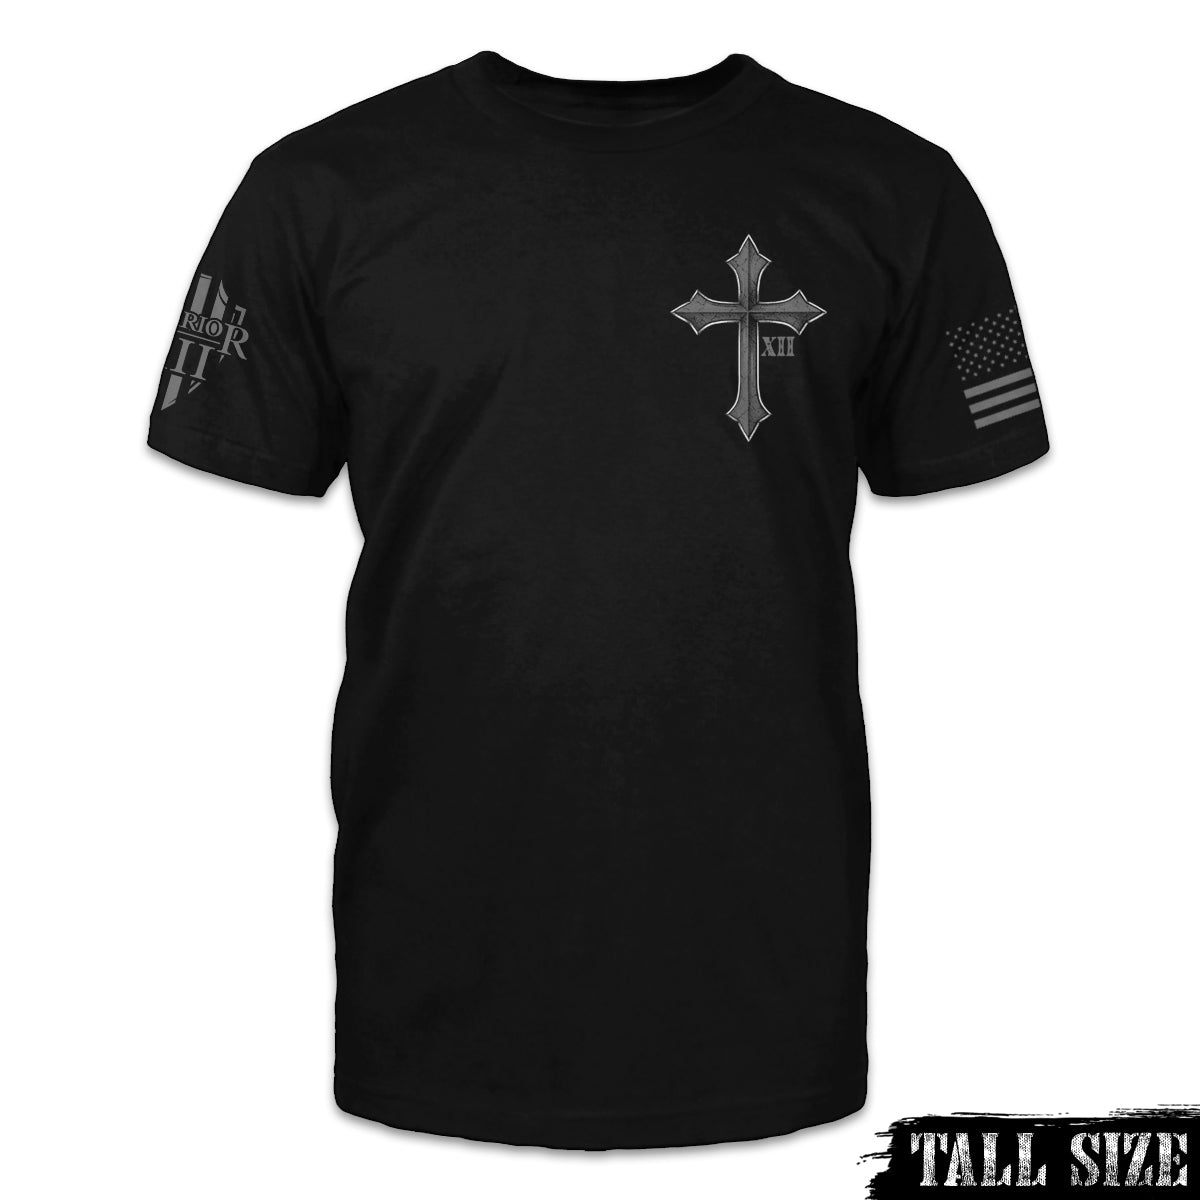 A black tall size shirt with a cross and roman numerals XII printed on the front of the shirt.